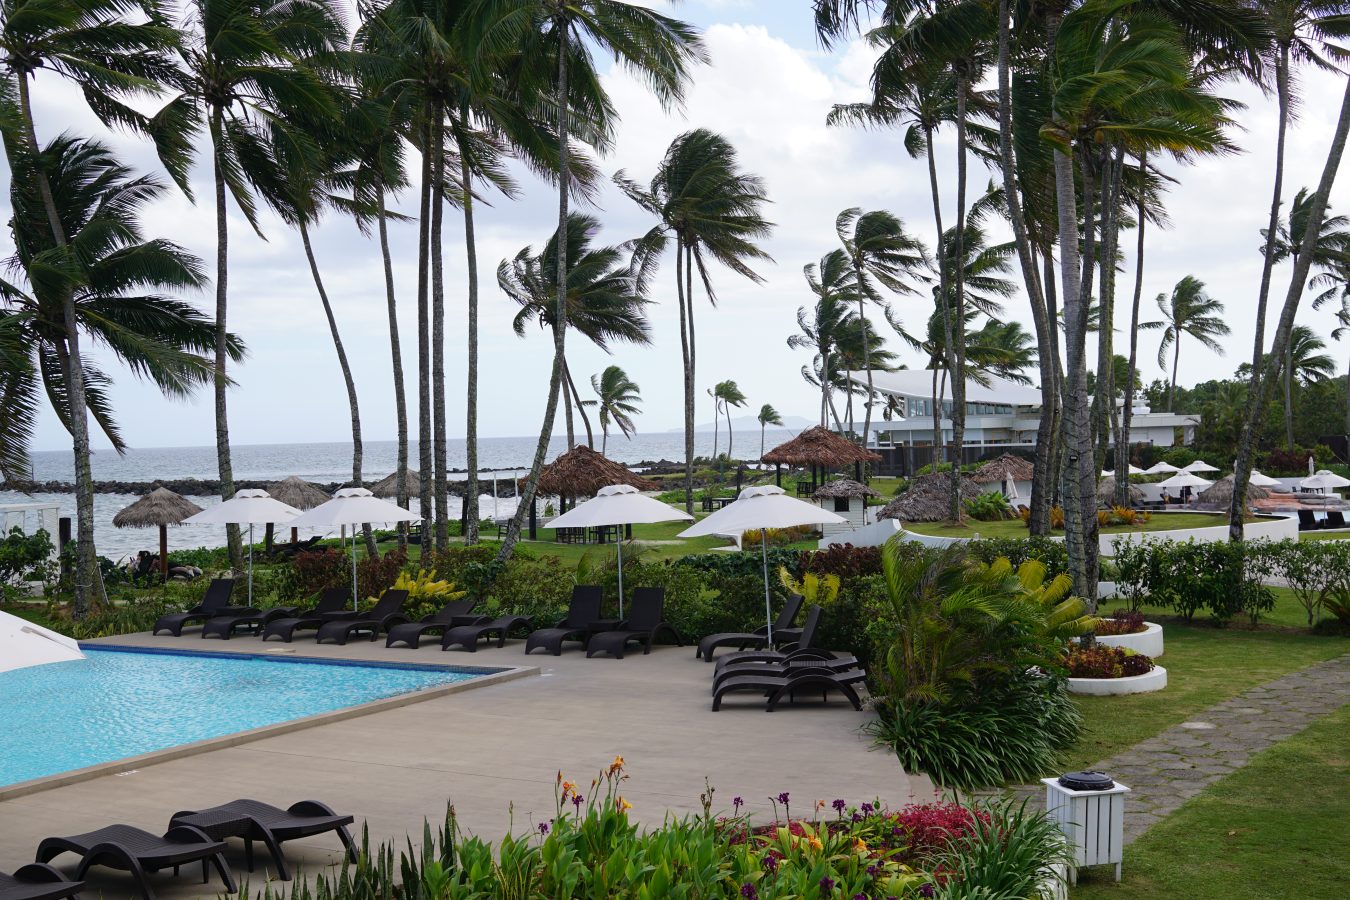 View of the pool, loungers, palm trees, and in the background the ocean at our resort in Pacific Harbour, Fiji.